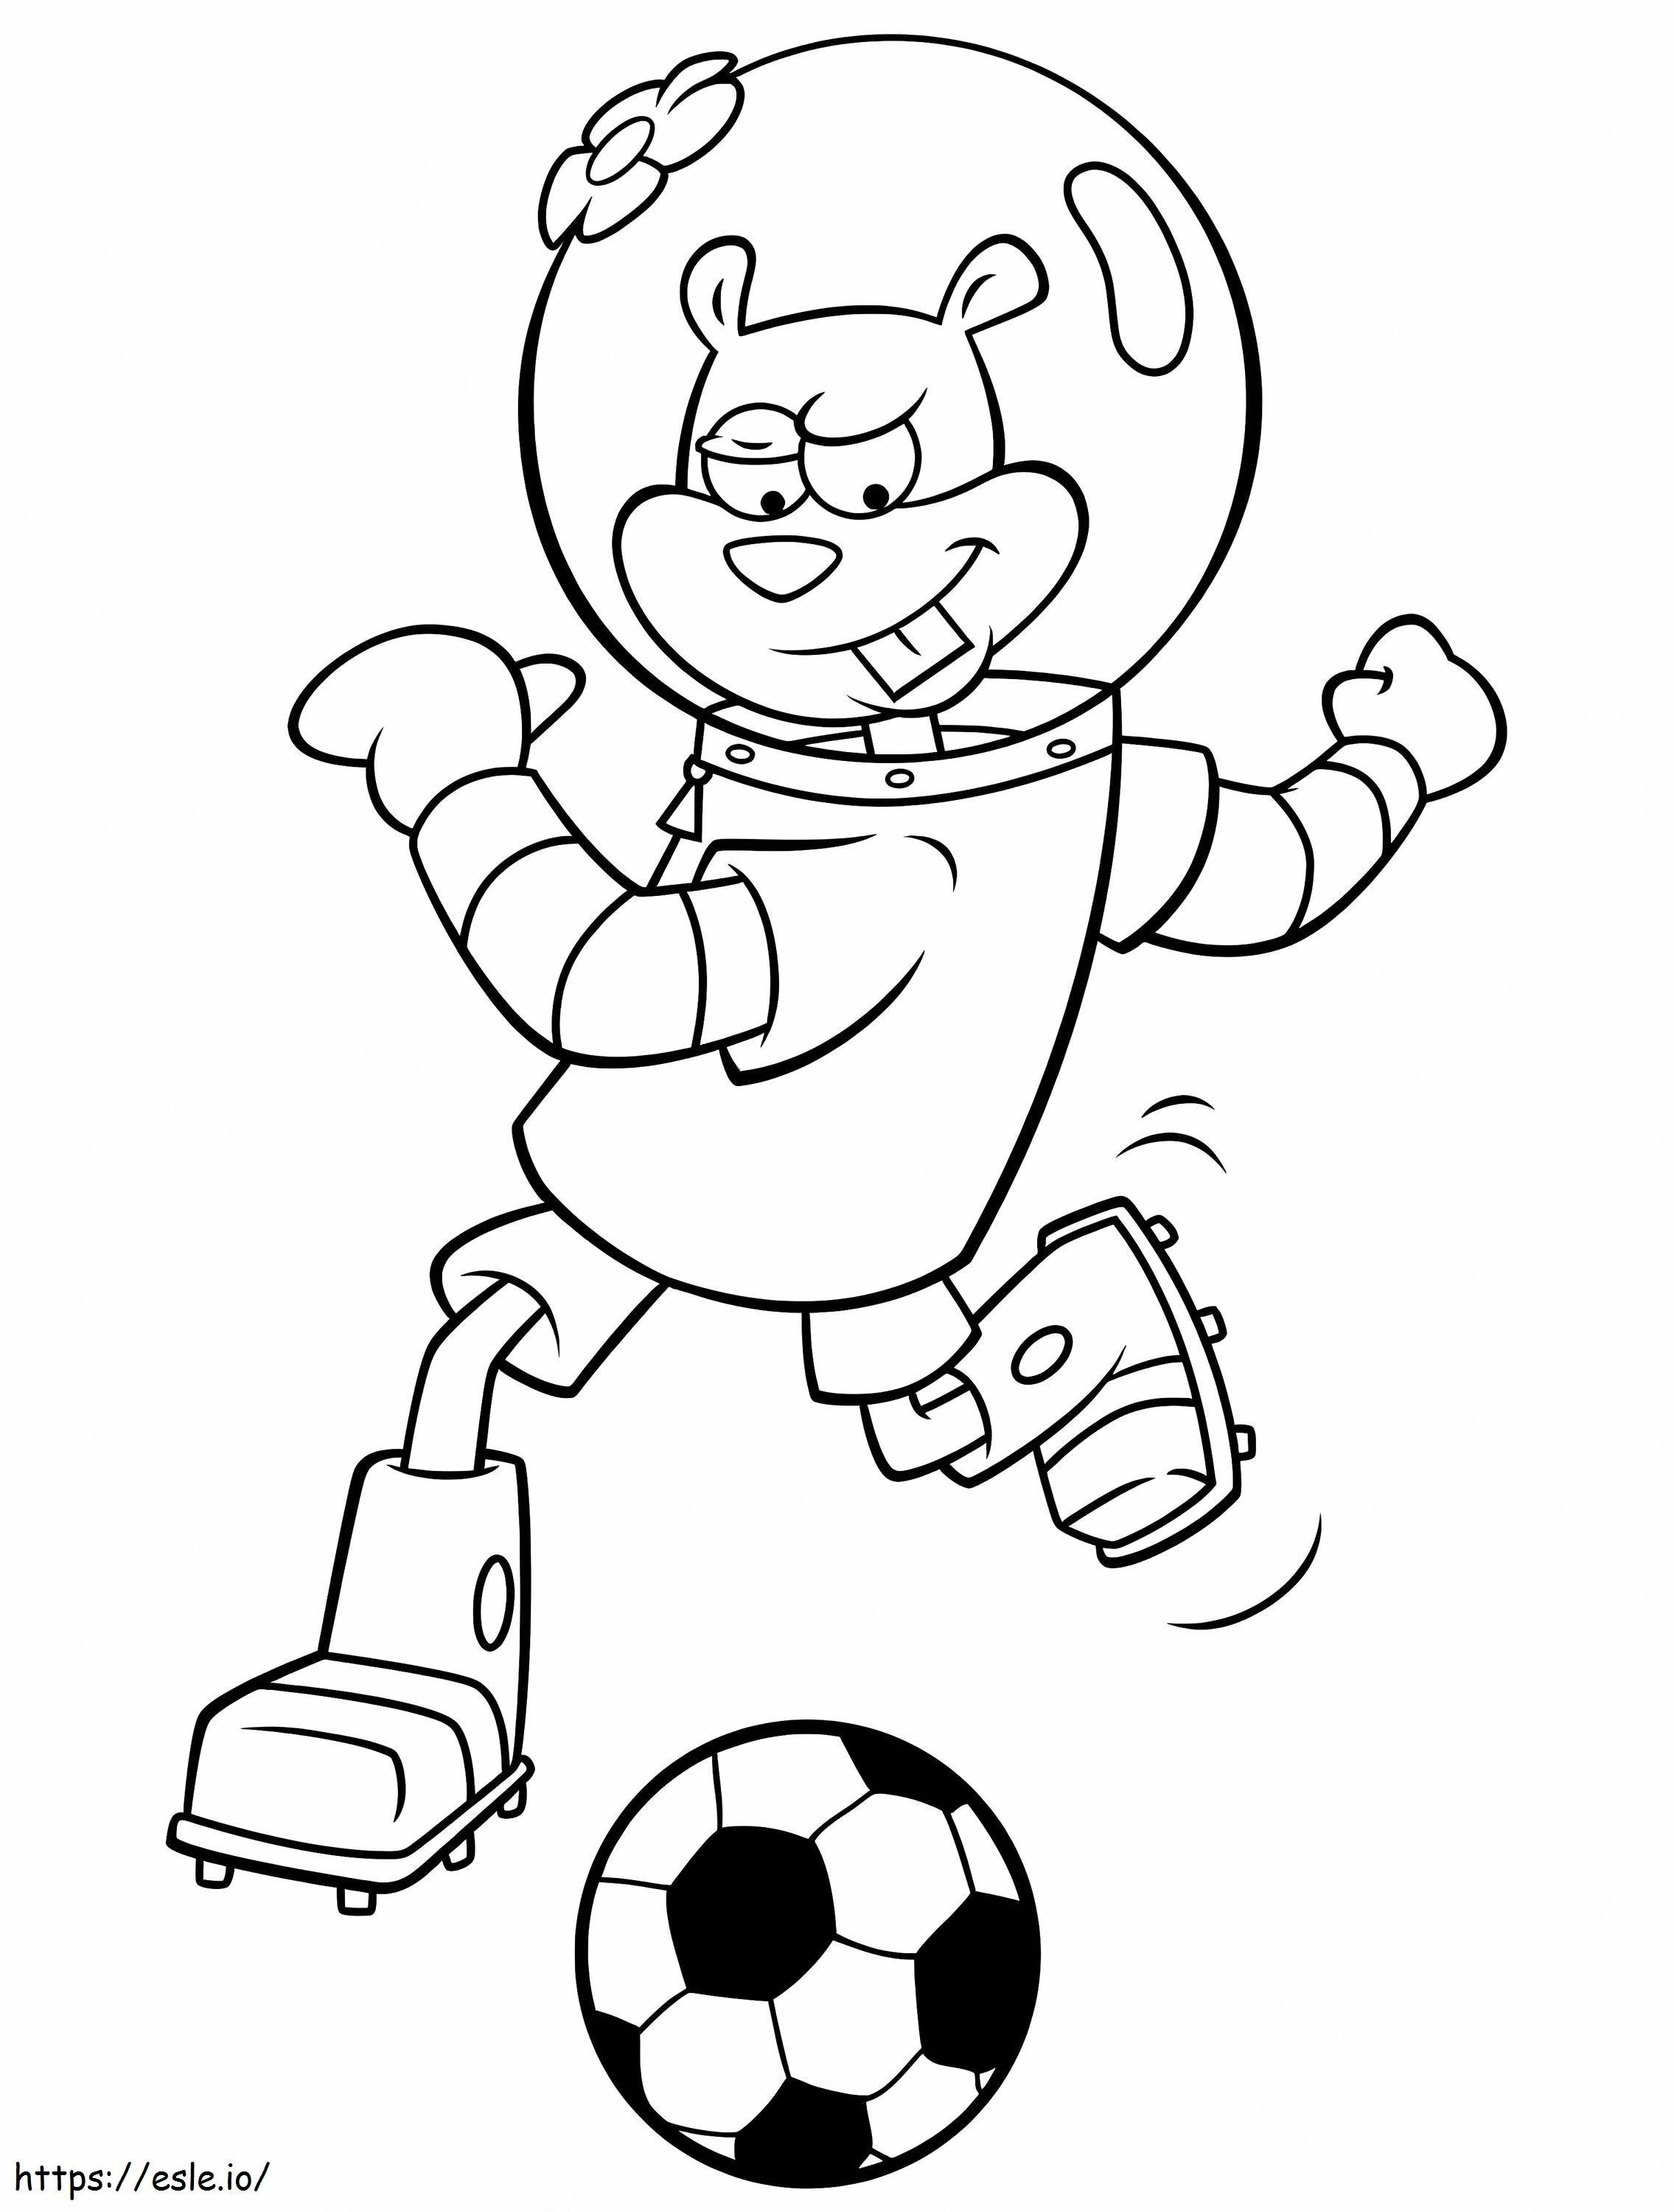 Soccer Sandy Cheeks coloring page